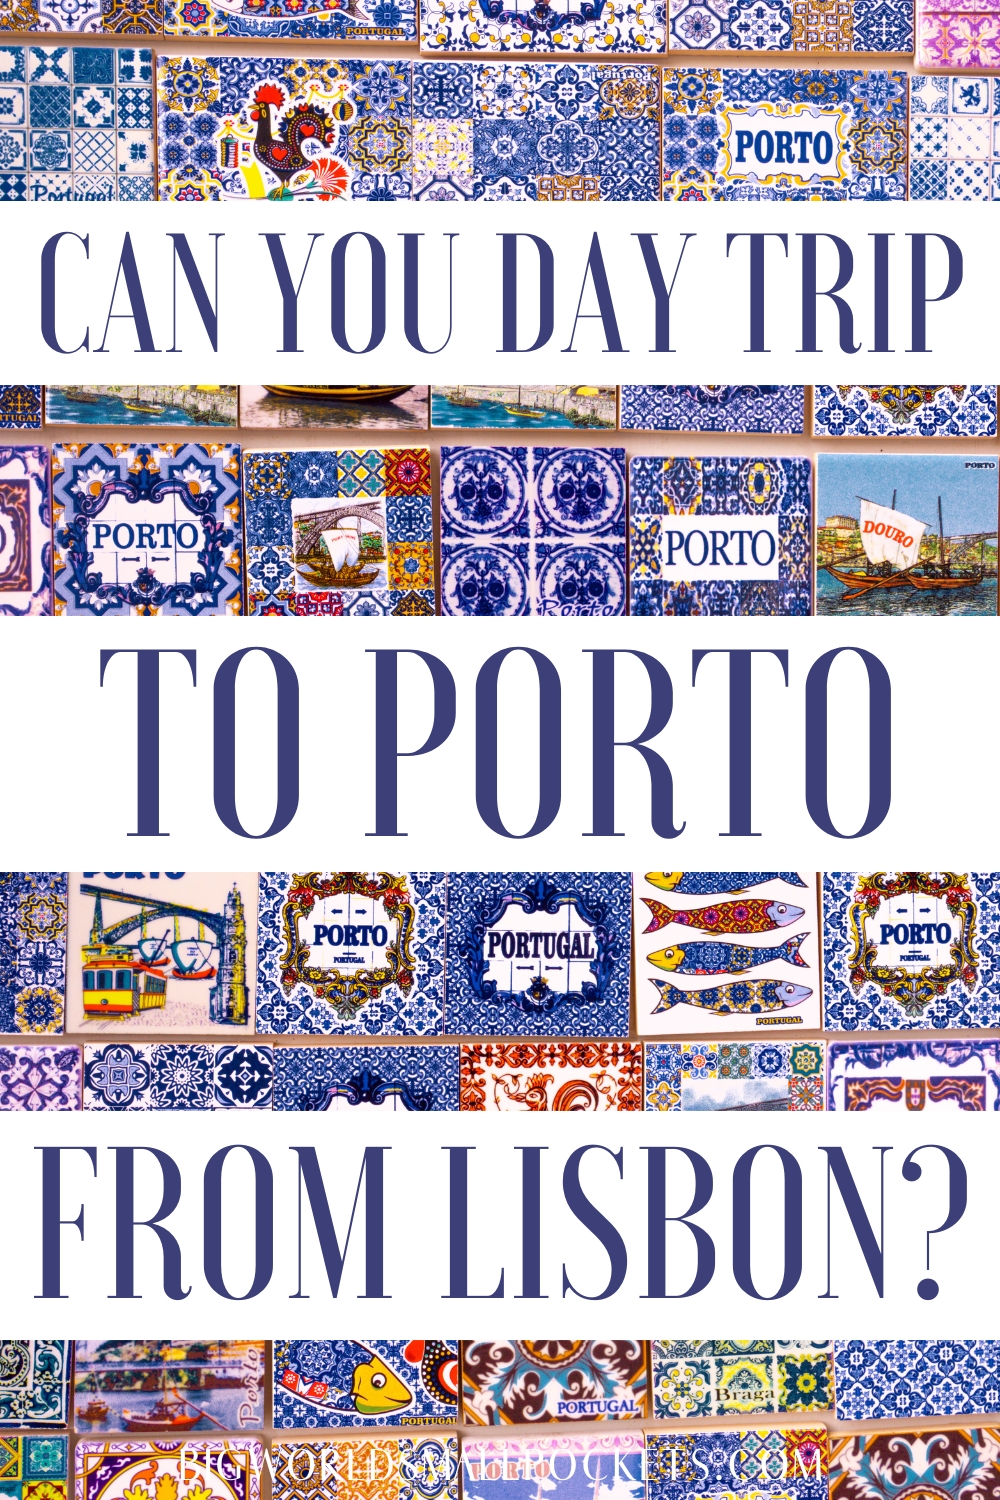 How to Day Trip to Porto from Lisbon